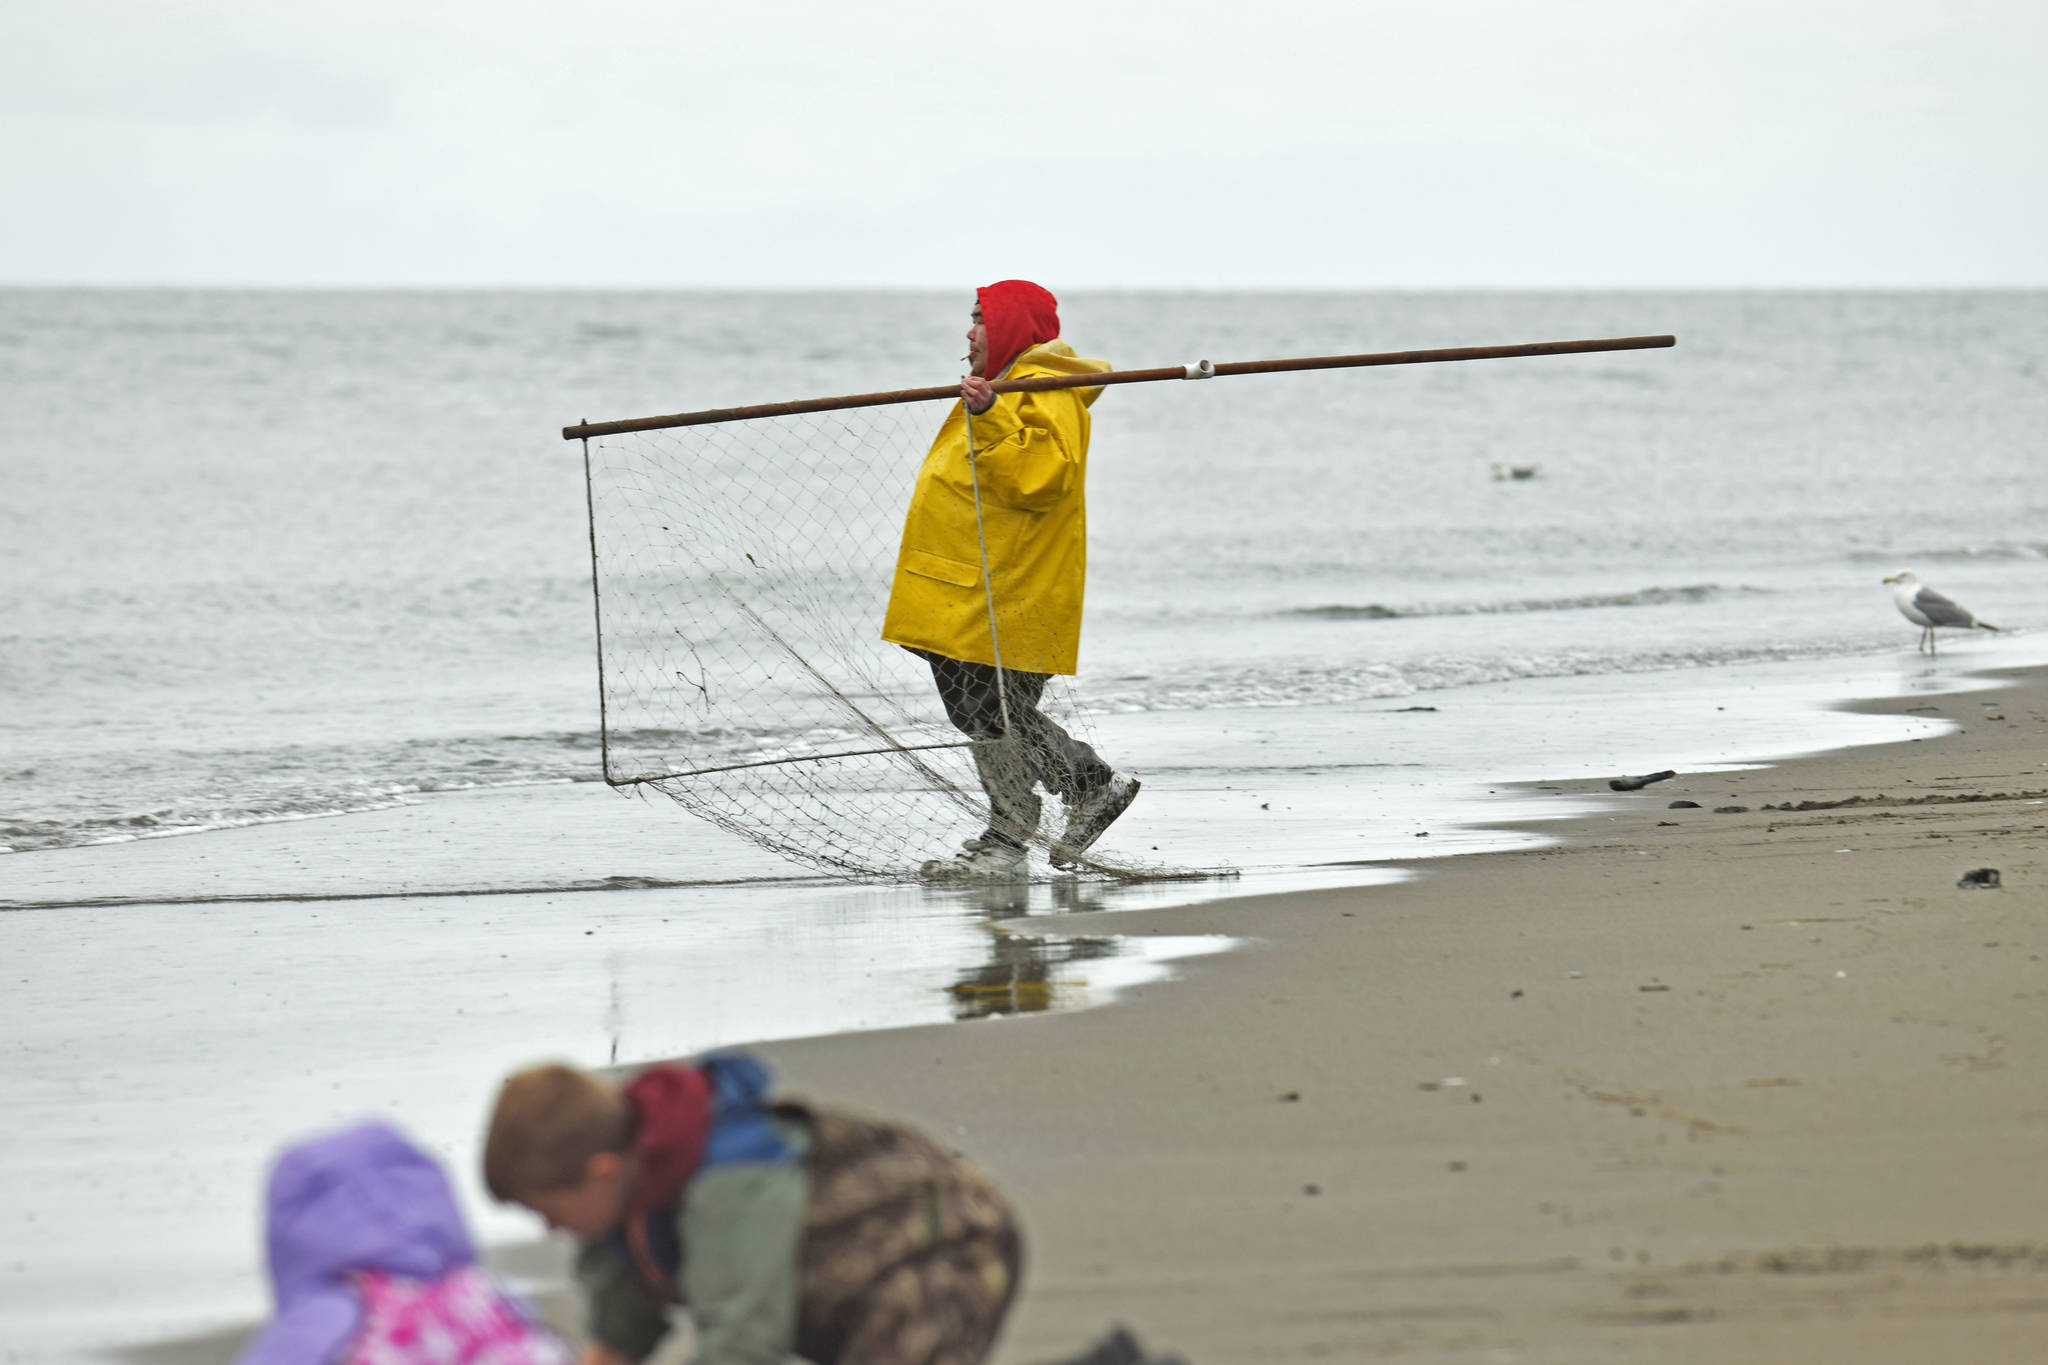 A dipnetter makes his way to the water on Tuesday, July 10, 2018, in Kenai, Alaska. Tuesday marked the opening of the three-week dipnetting season, during which Alaska residents can harvest salmon and flounder for personal use. (Photo by Erin Thompson/Peninsula Clarion)